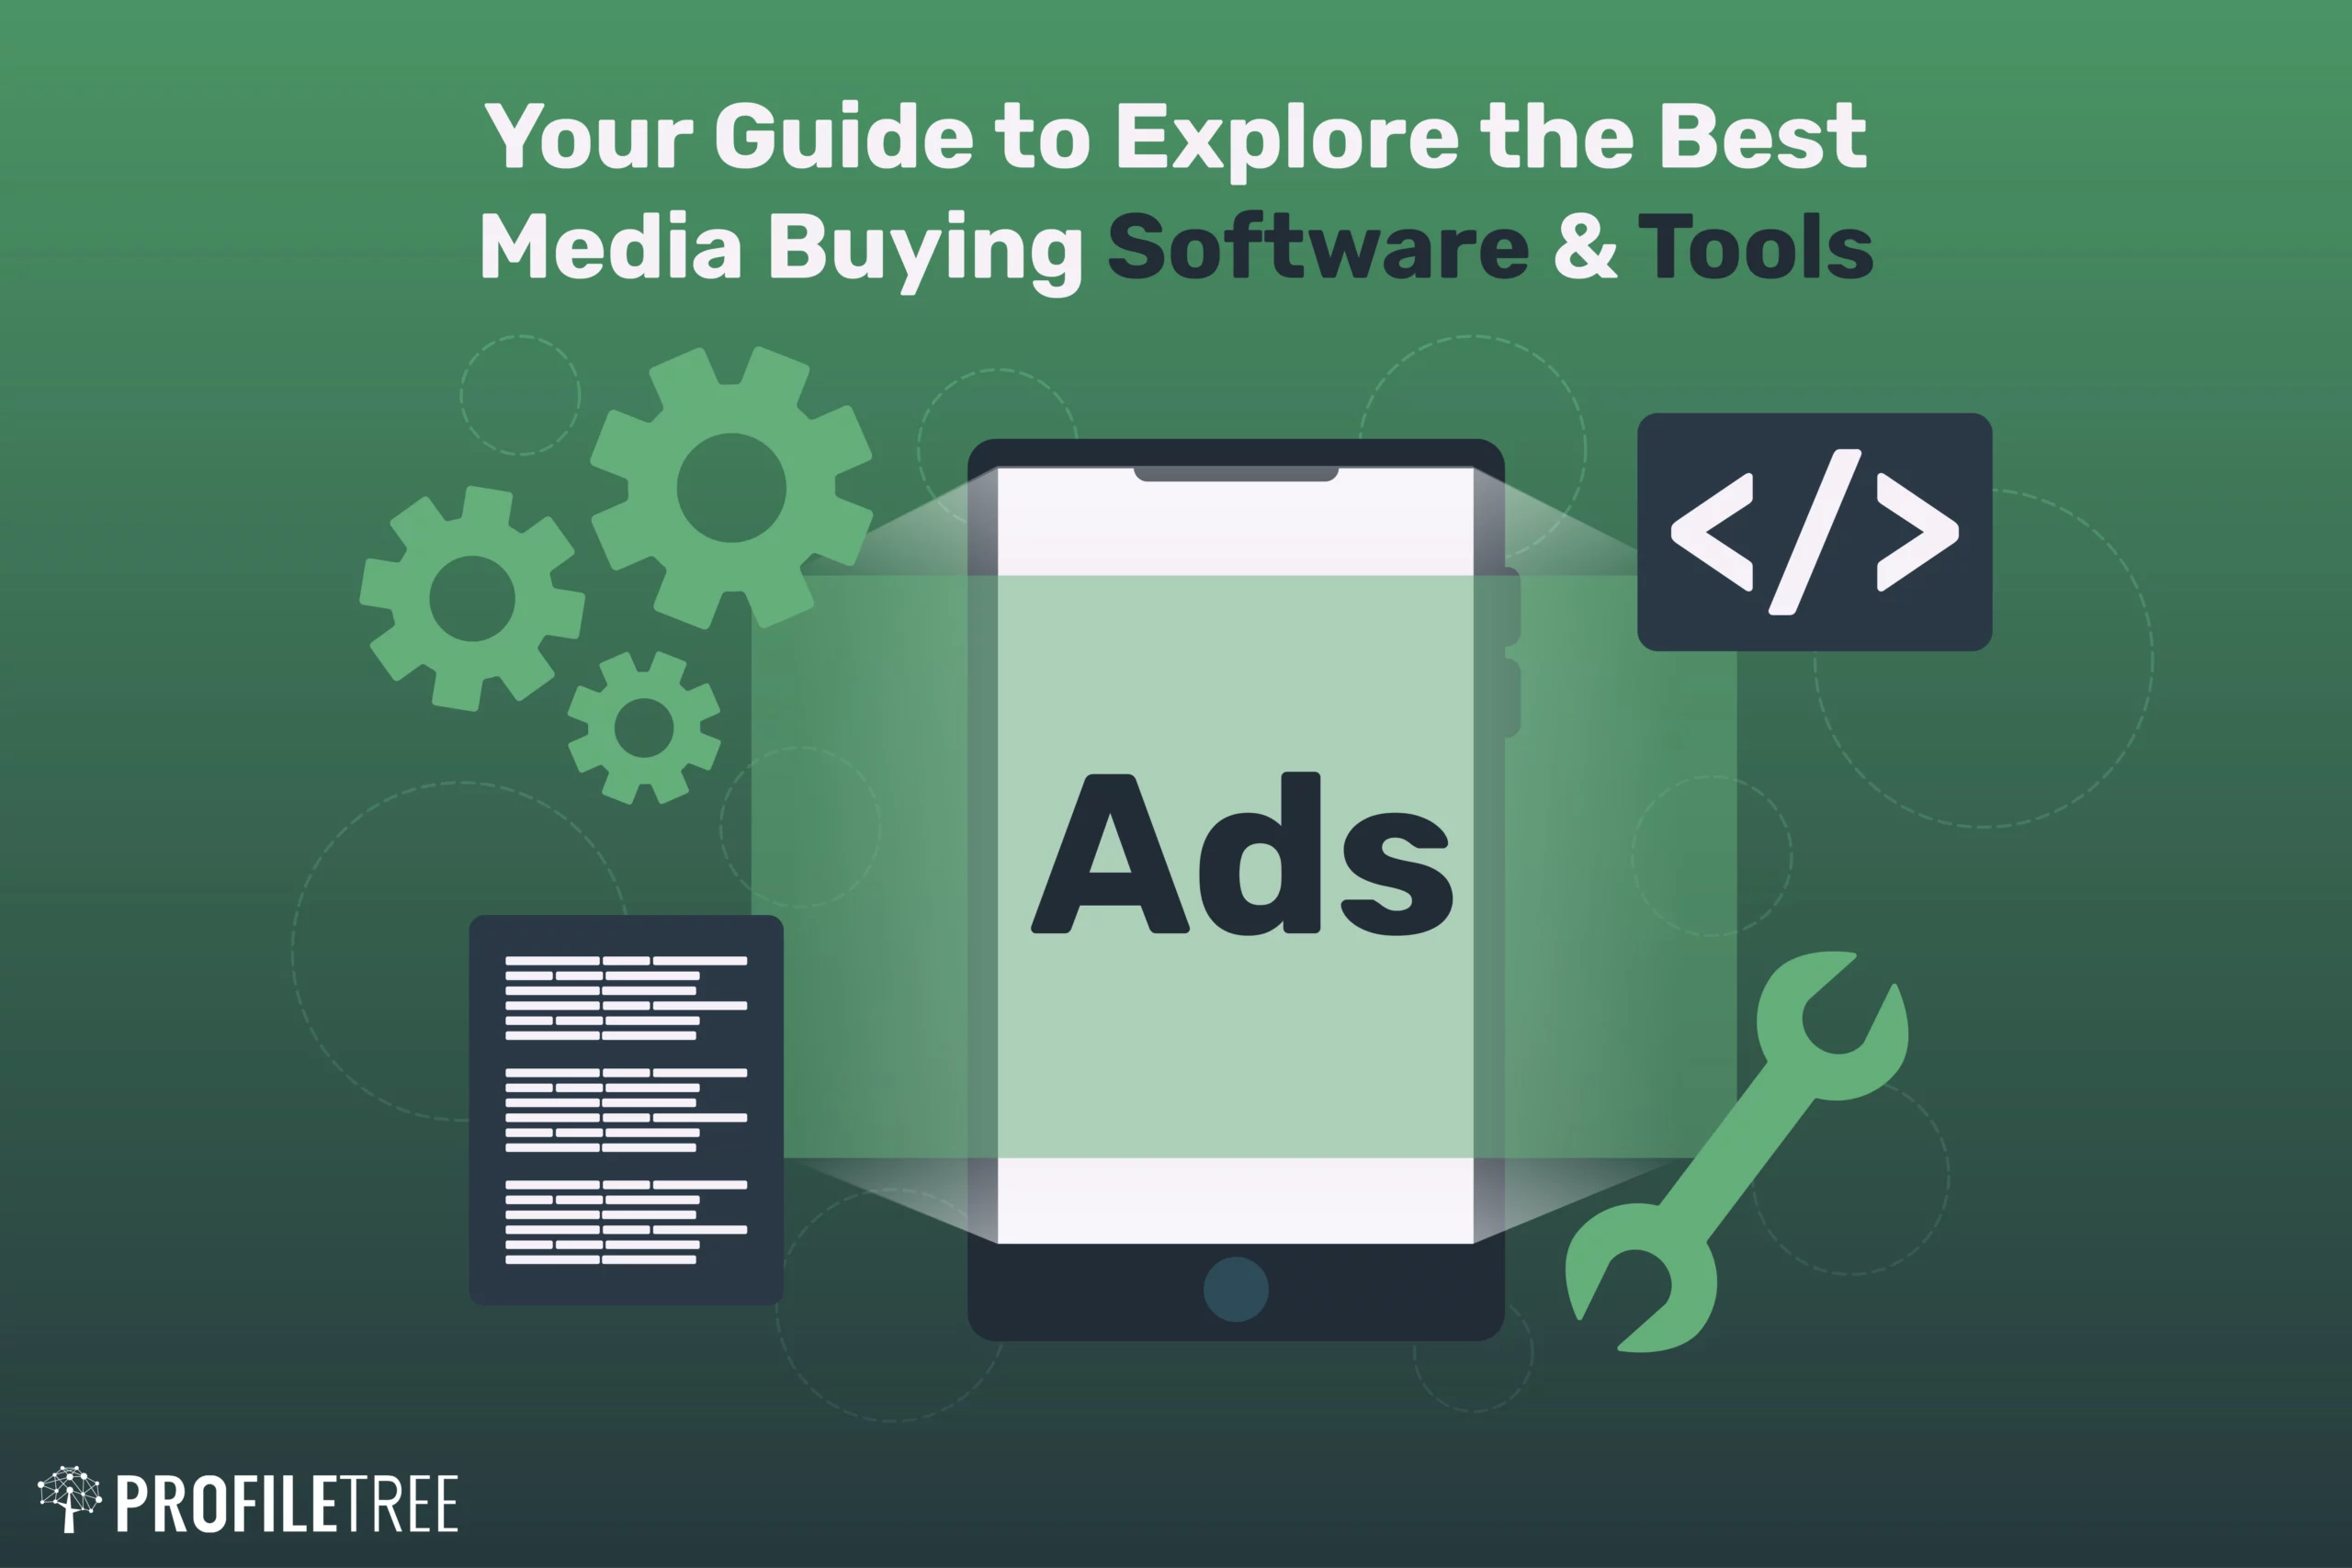 what is the best media buying software?